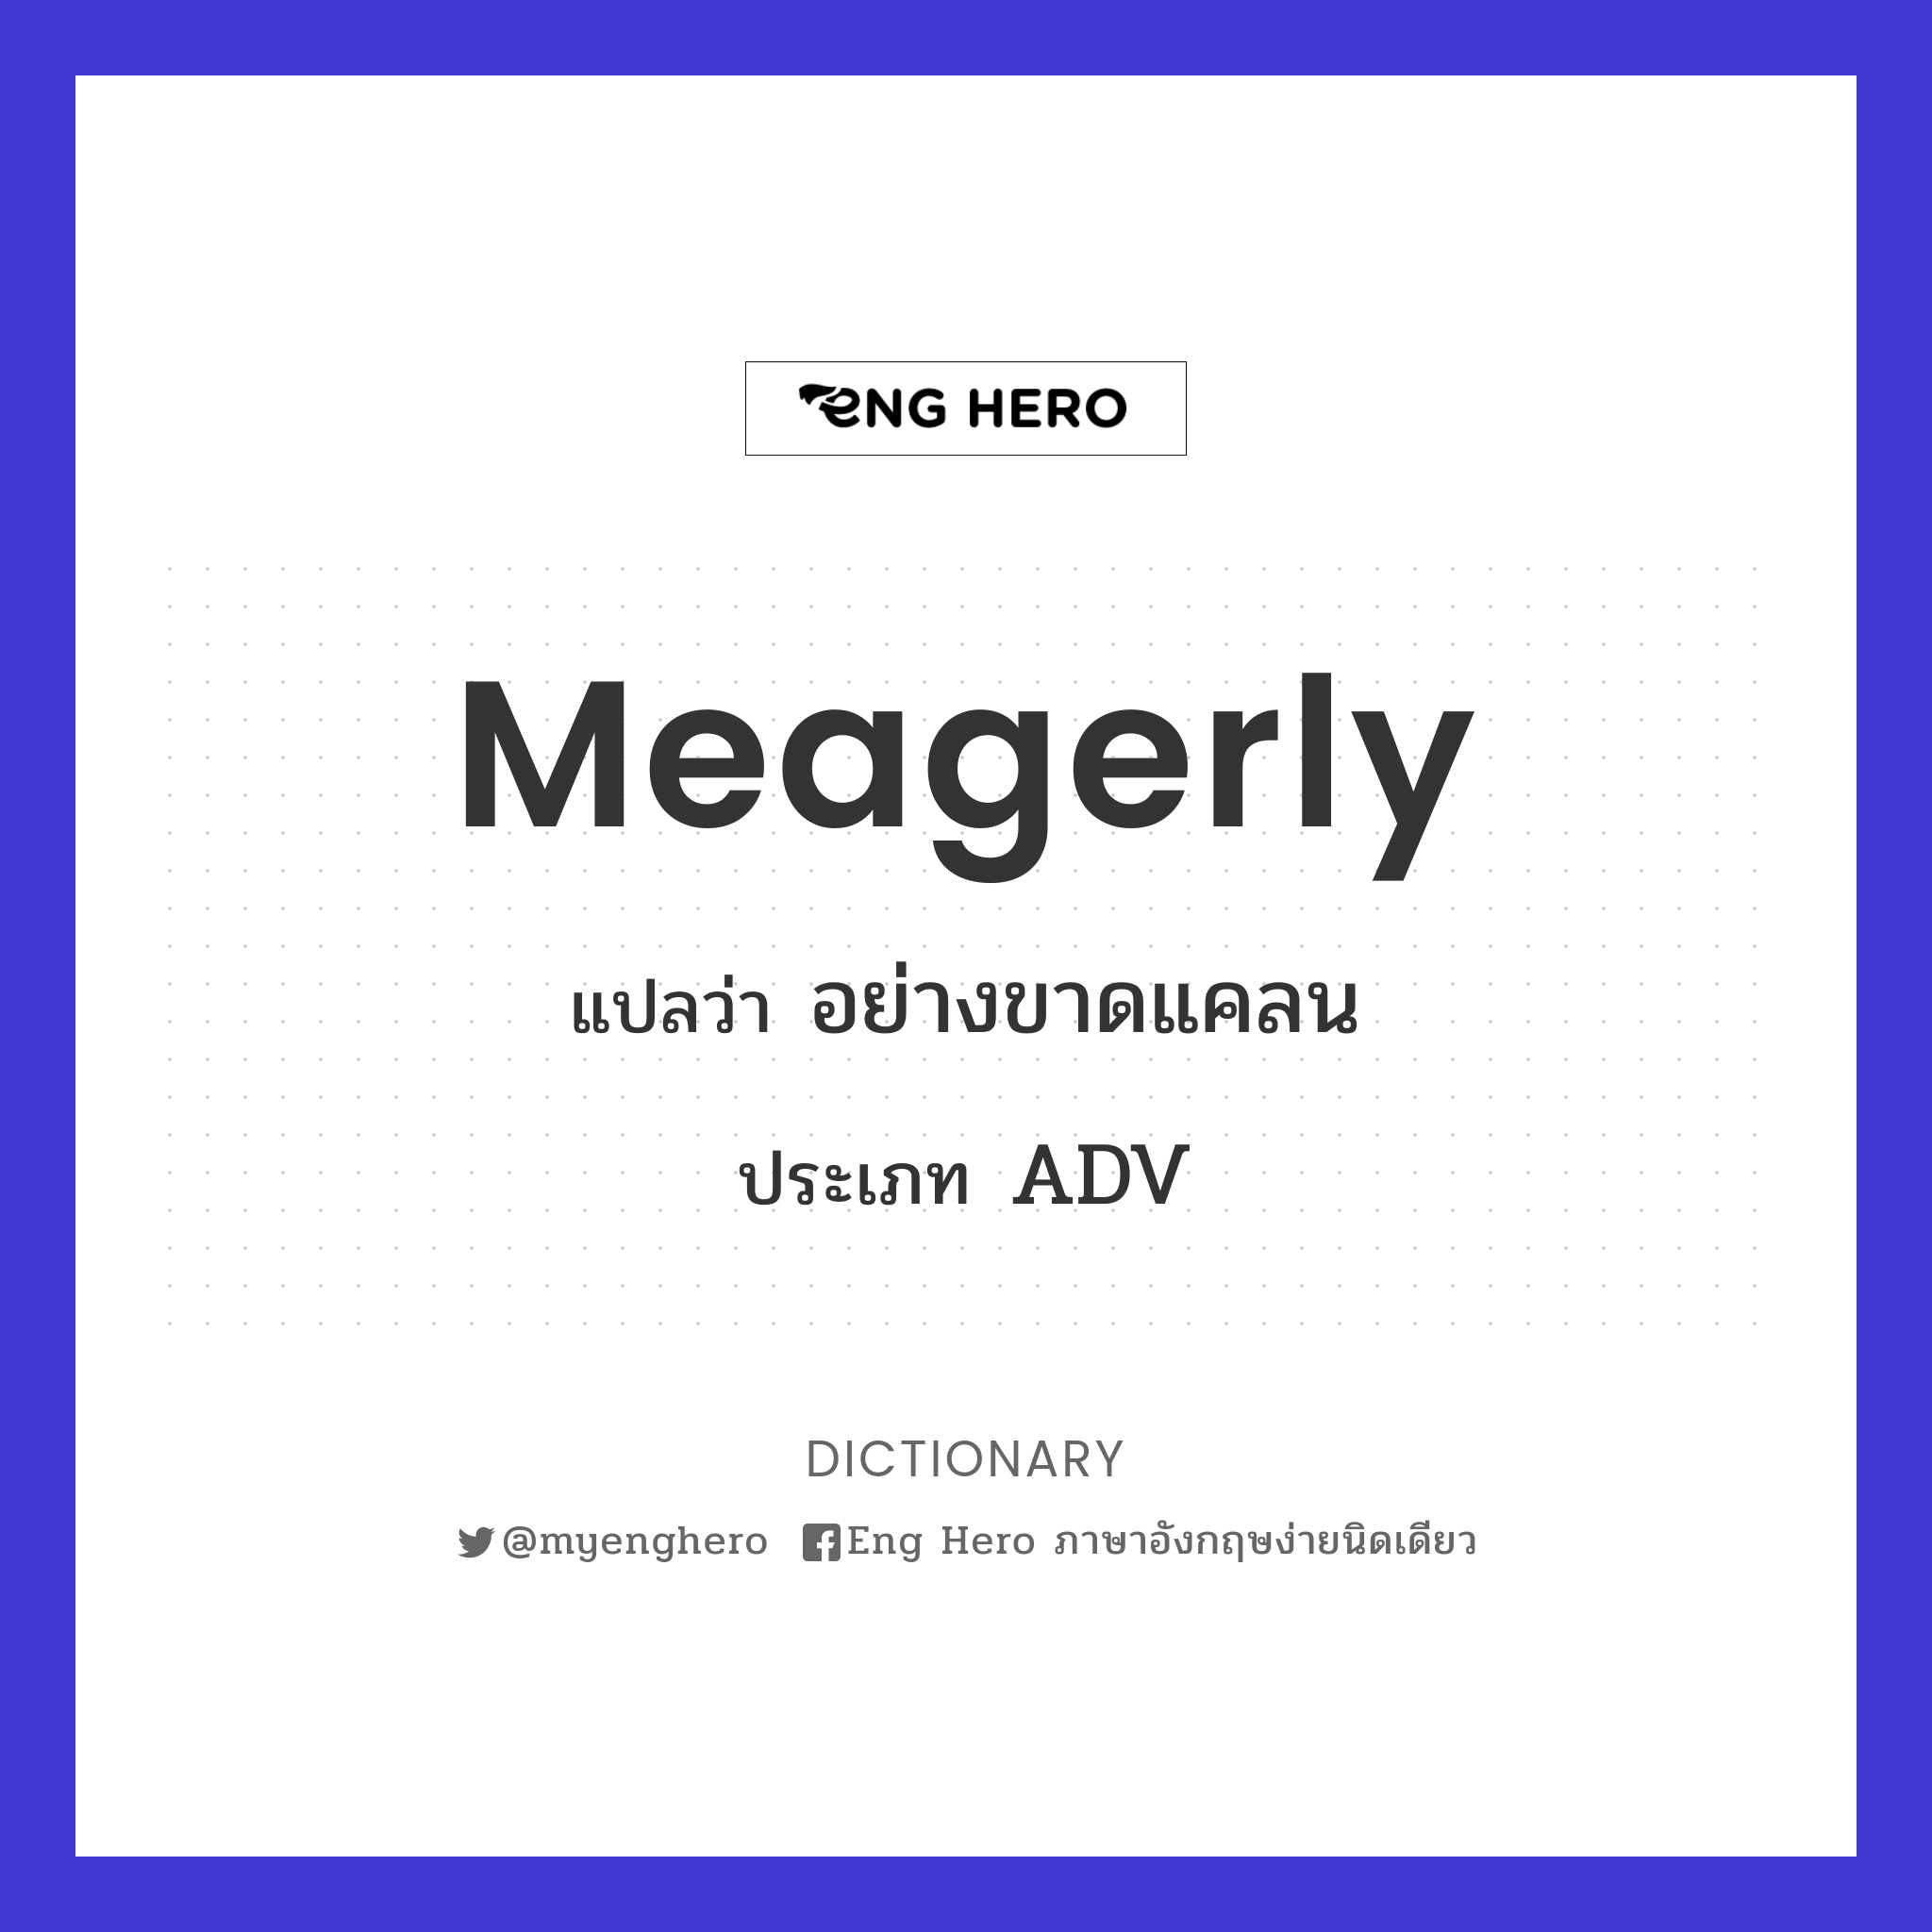 meagerly